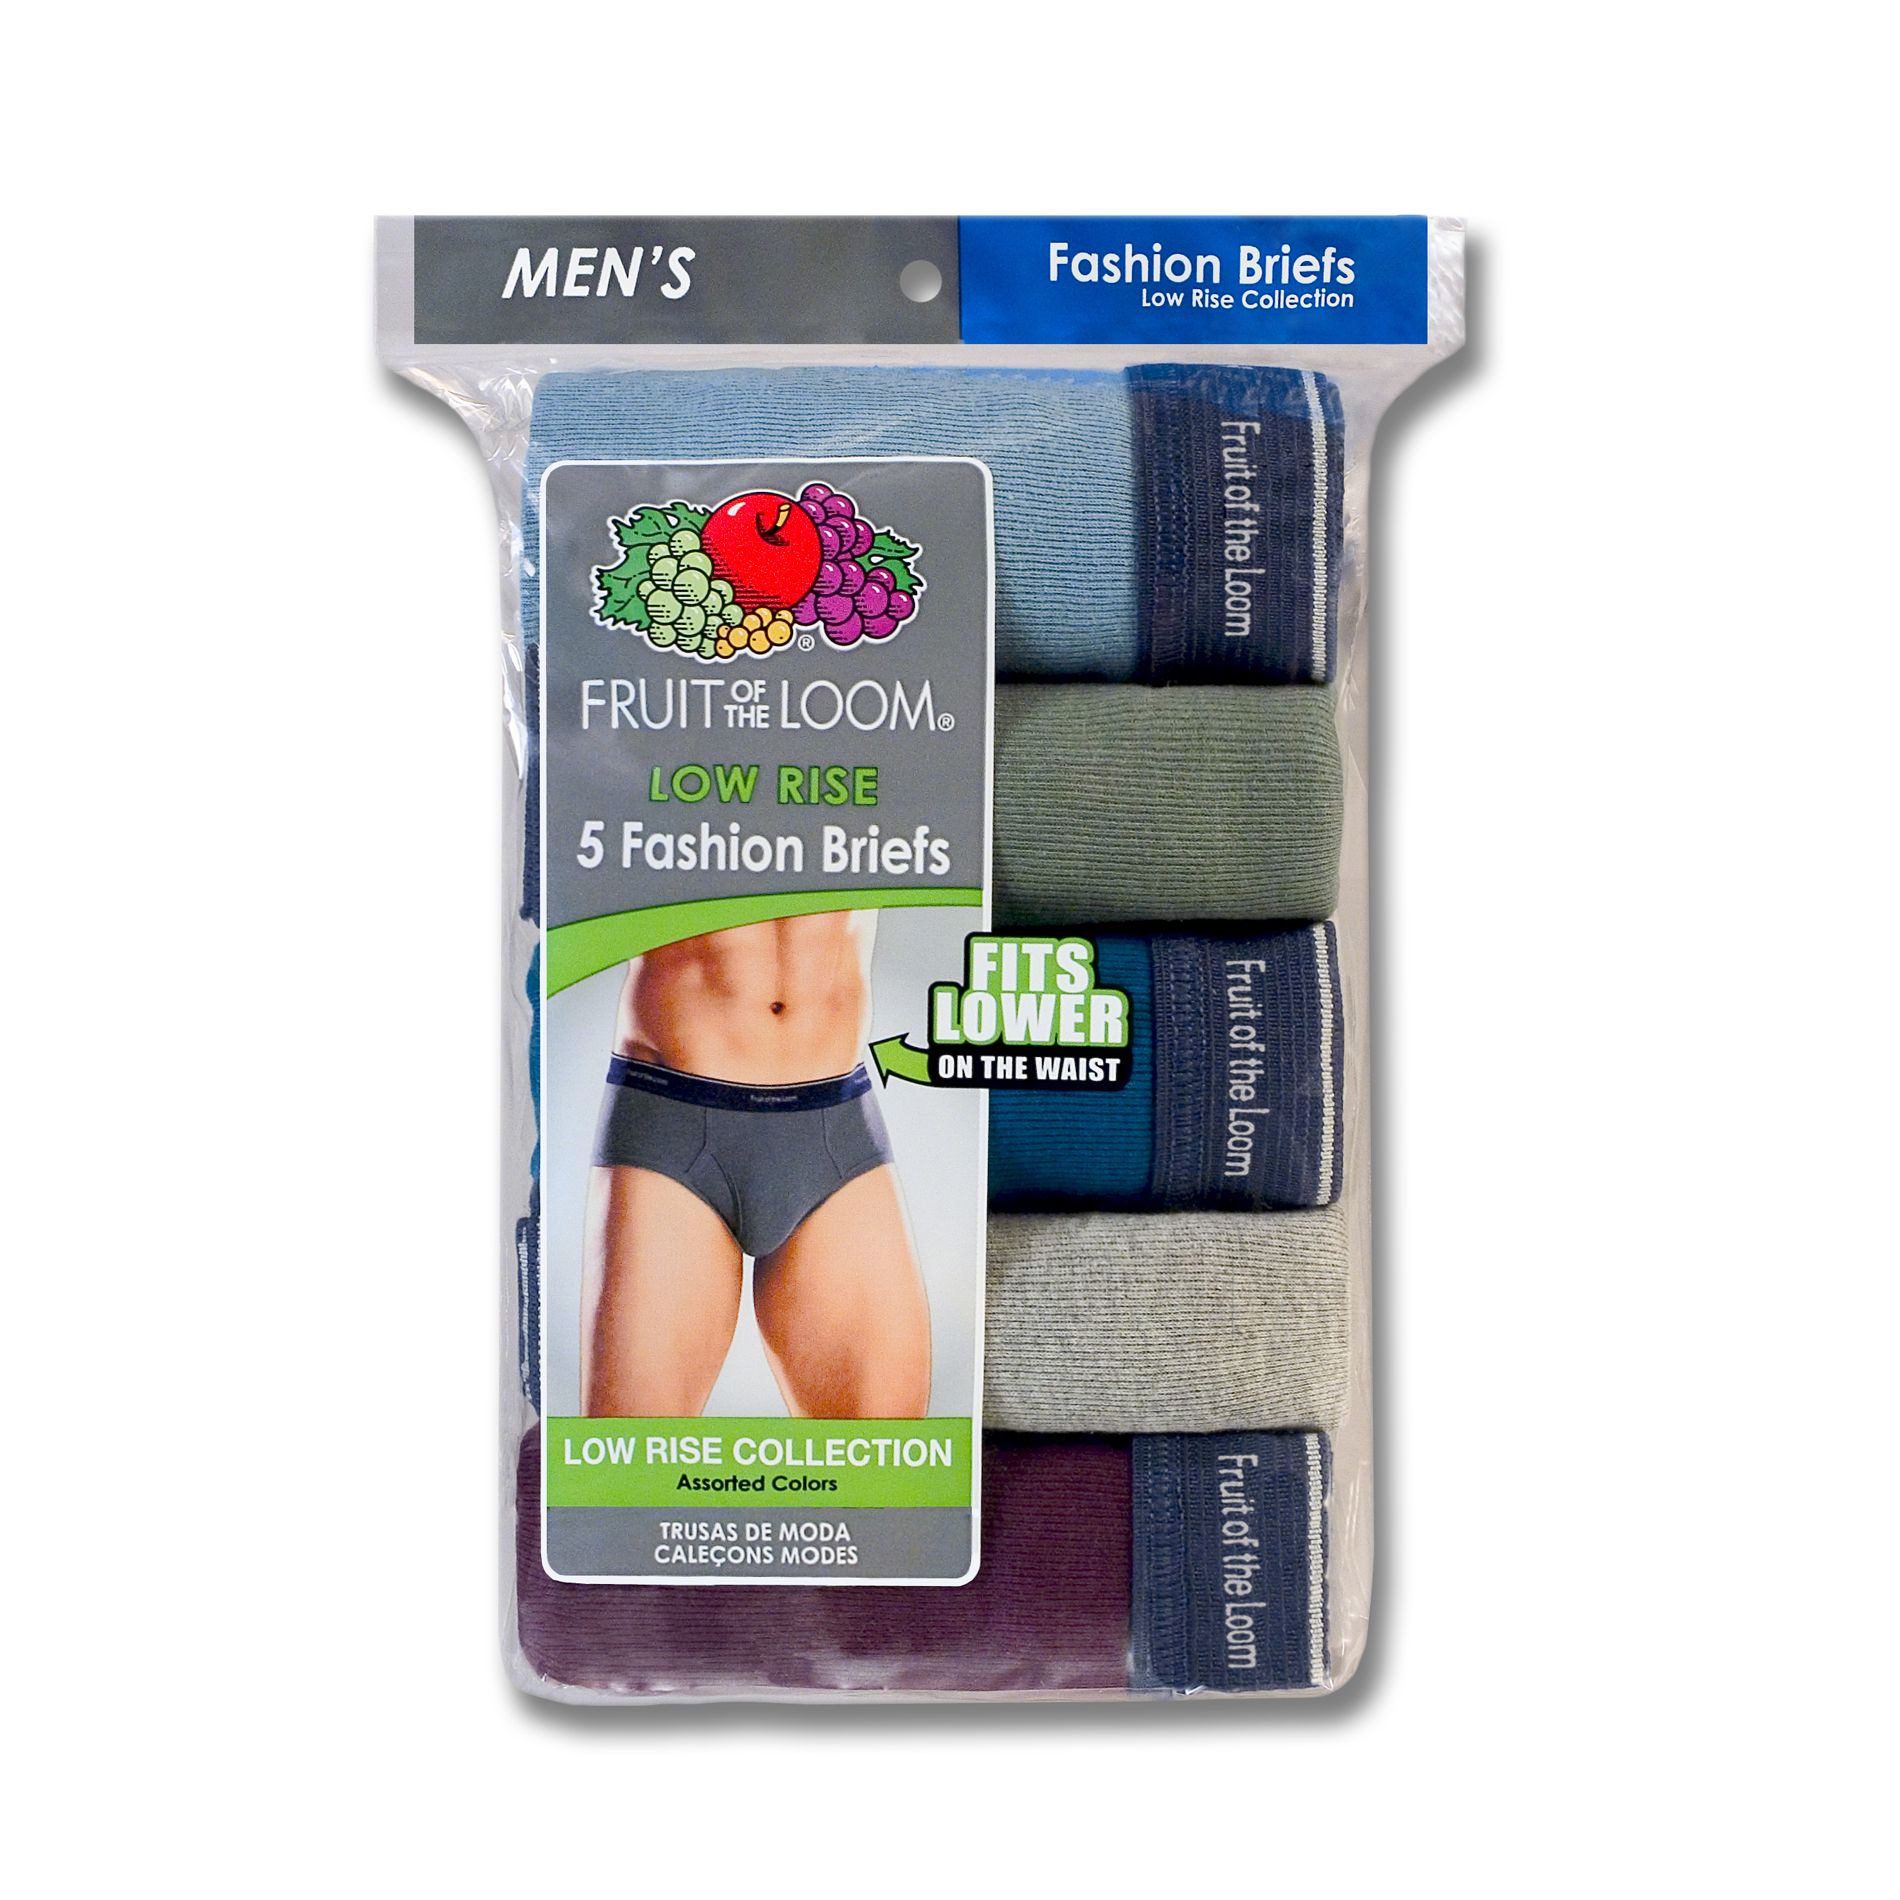 Fruit of the Loom Men's Low Rise Fashion Briefs - Assorted 5 Pack